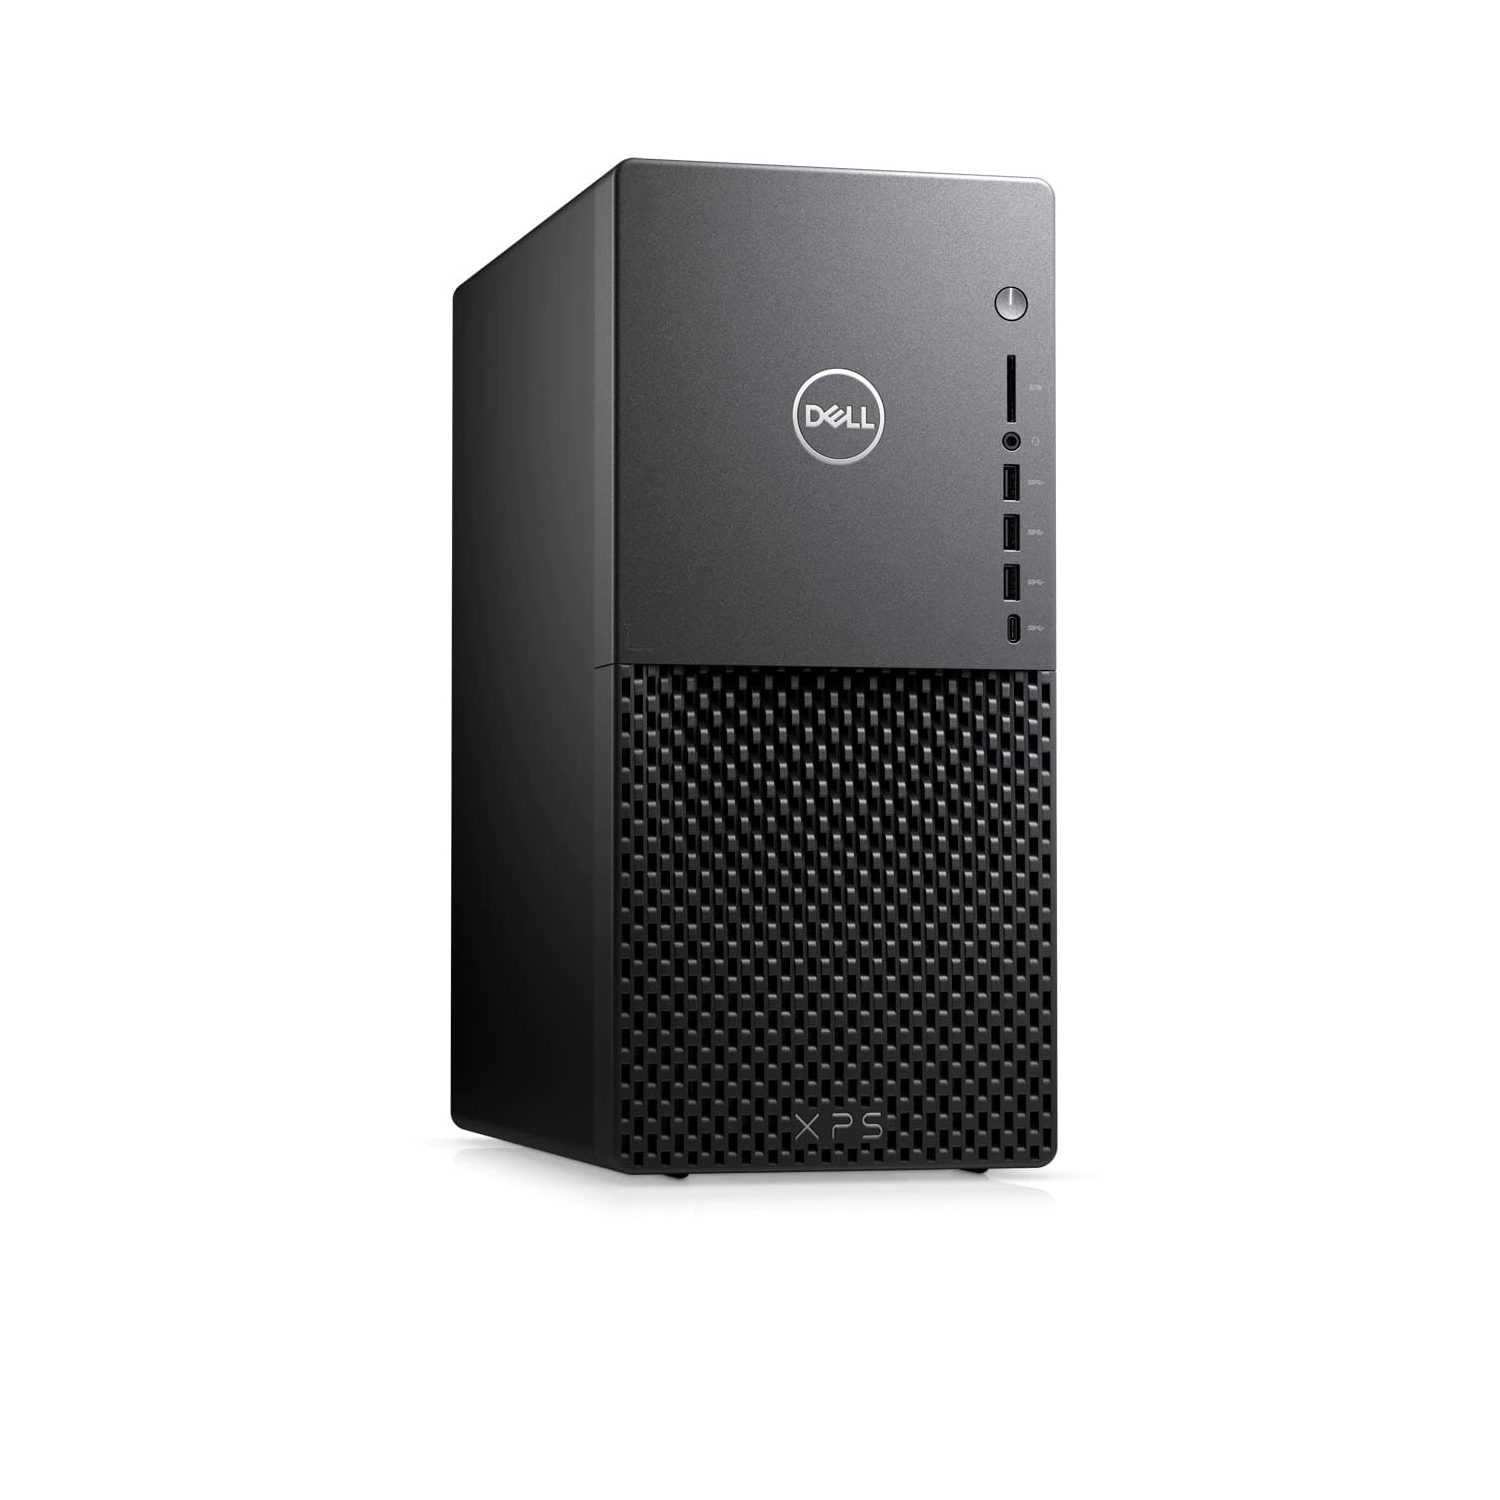 Refurbished (Excellent) - Dell XPS 8940 Desktop (2020) | Core i5 - 1TB HDD + 256GB SSD - 8GB RAM - 1660 Ti | 6 Cores @ 4.3 GHz - 10th Gen CPU Certified Refurbished